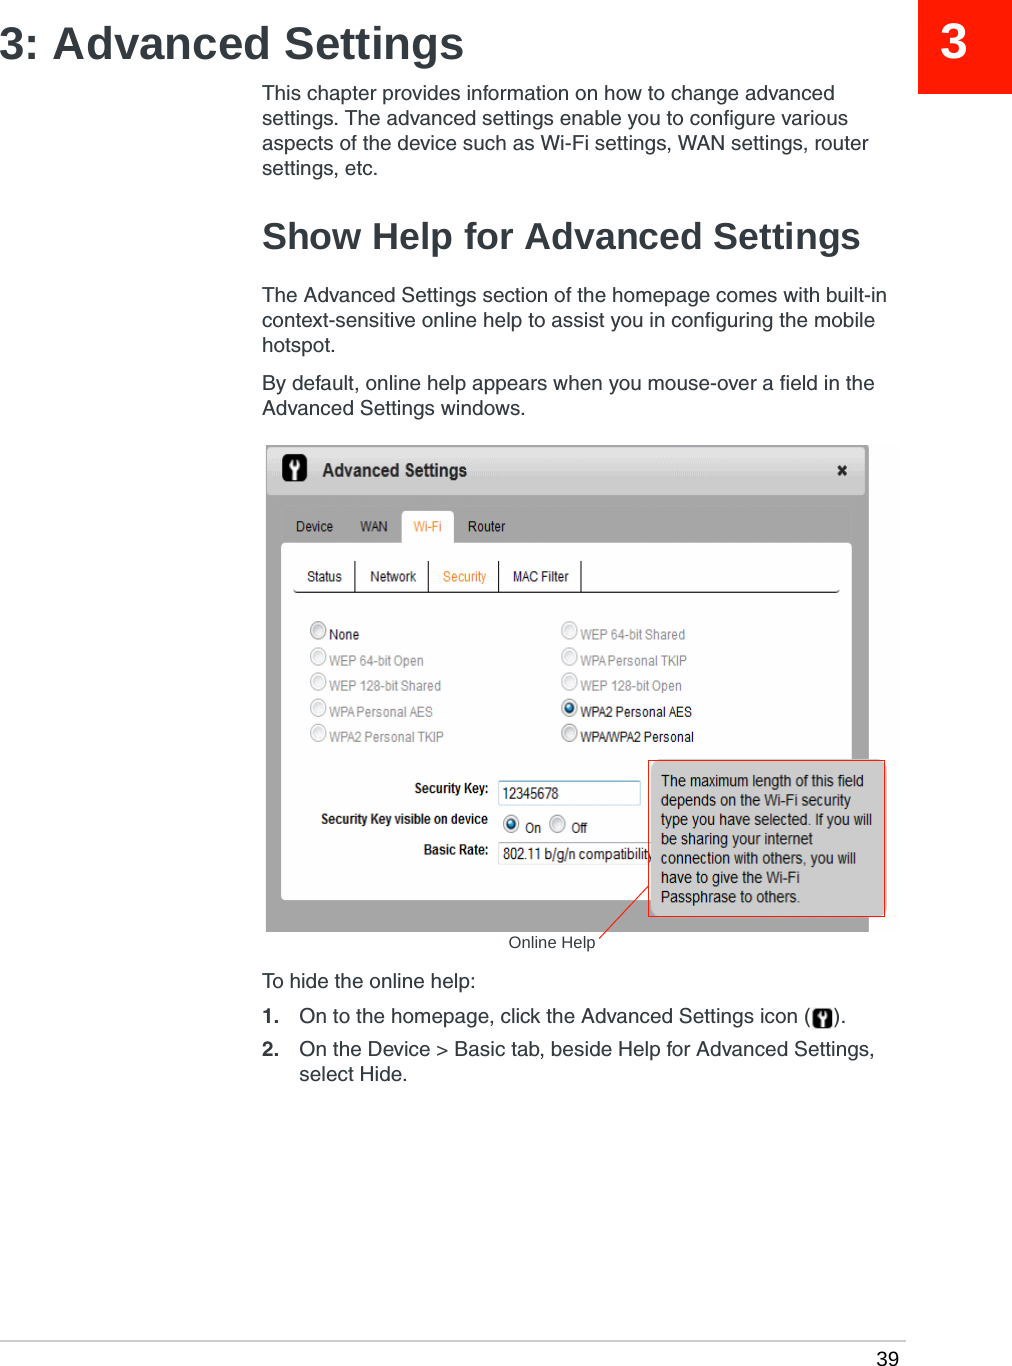  3933: Advanced SettingsThis chapter provides information on how to change advanced settings. The advanced settings enable you to configure various aspects of the device such as Wi-Fi settings, WAN settings, router settings, etc.Show Help for Advanced SettingsThe Advanced Settings section of the homepage comes with built-in context-sensitive online help to assist you in configuring the mobile hotspot.By default, online help appears when you mouse-over a field in the Advanced Settings windows.To hide the online help:1. On to the homepage, click the Advanced Settings icon ( ).2. On the Device &gt; Basic tab, beside Help for Advanced Settings, select Hide.Online Help